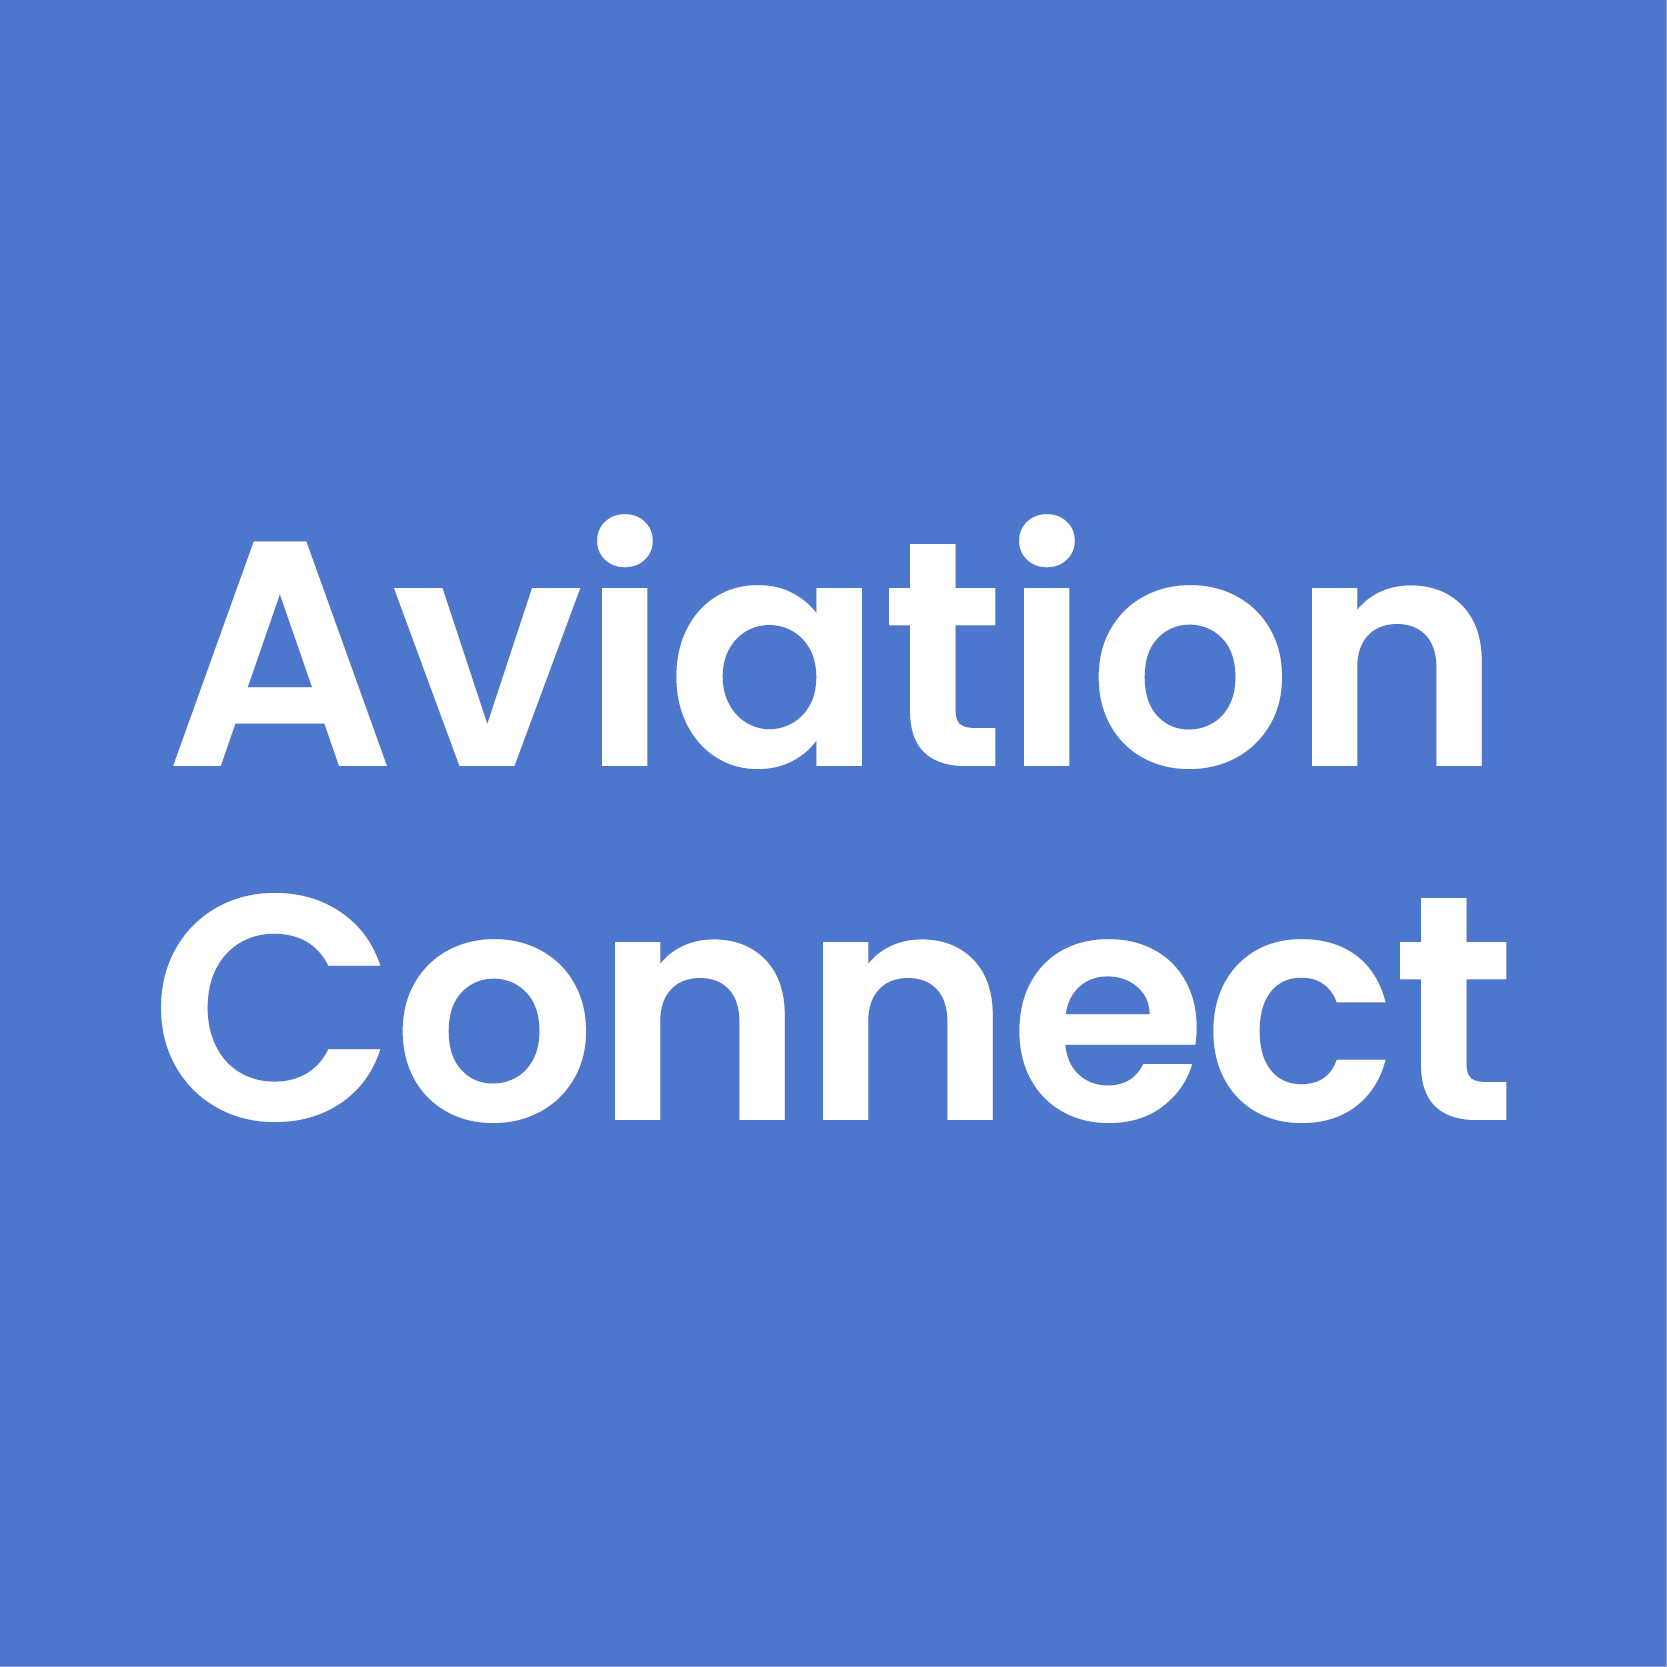 Aviation Connect